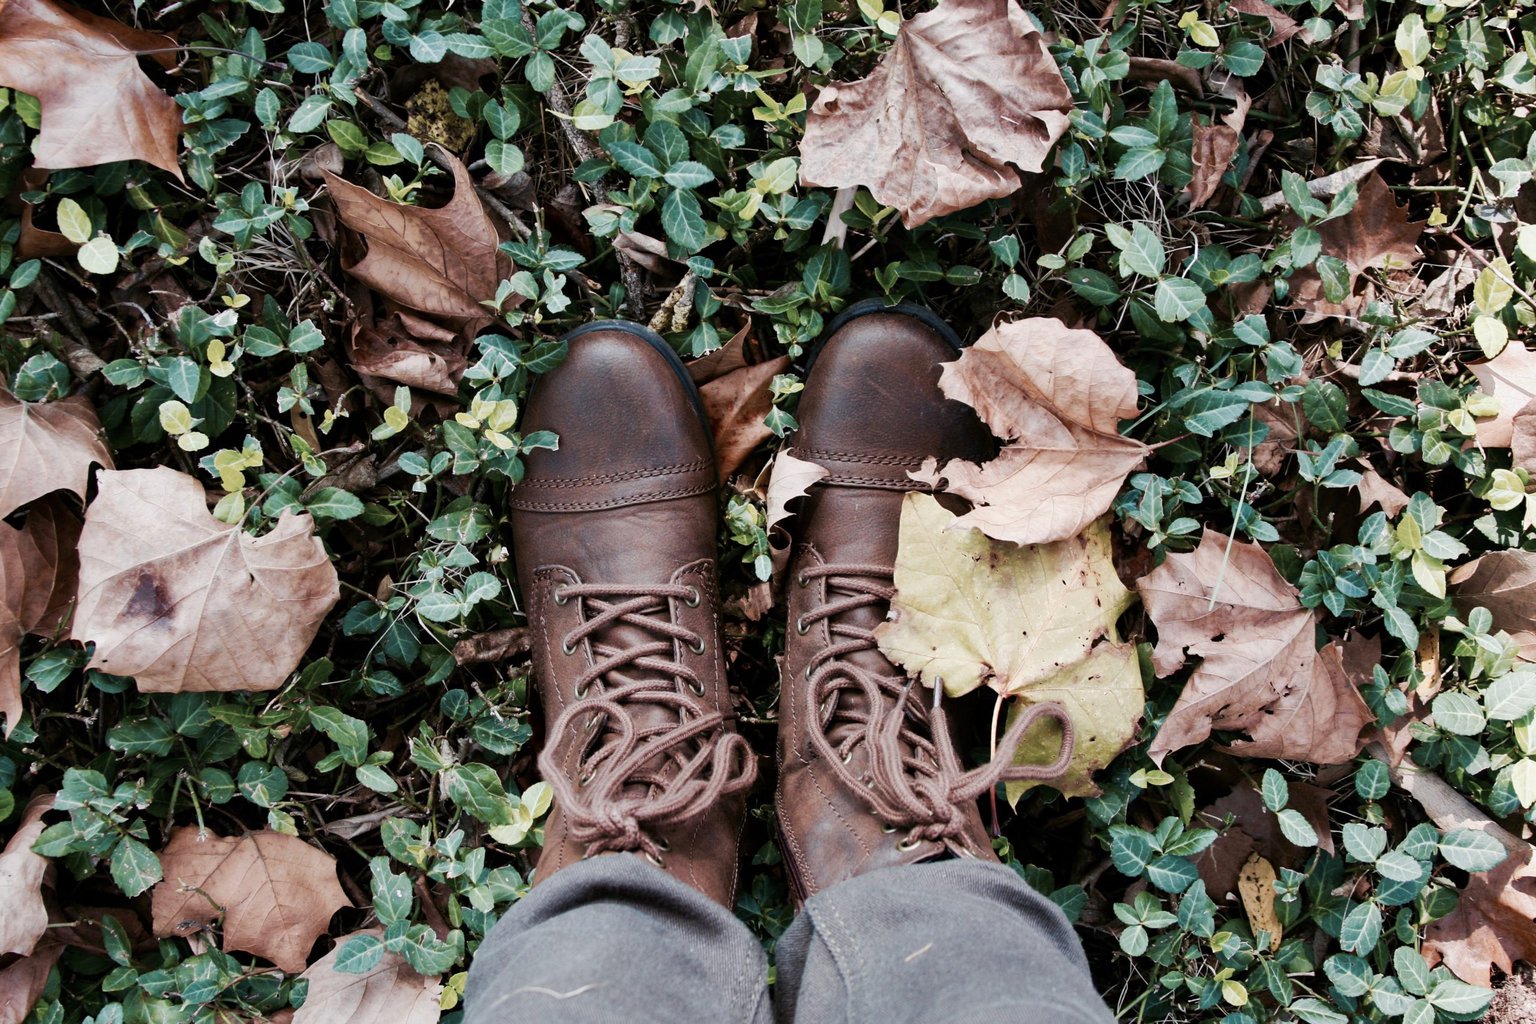 Shoes in Fall leaves photo from unsplash